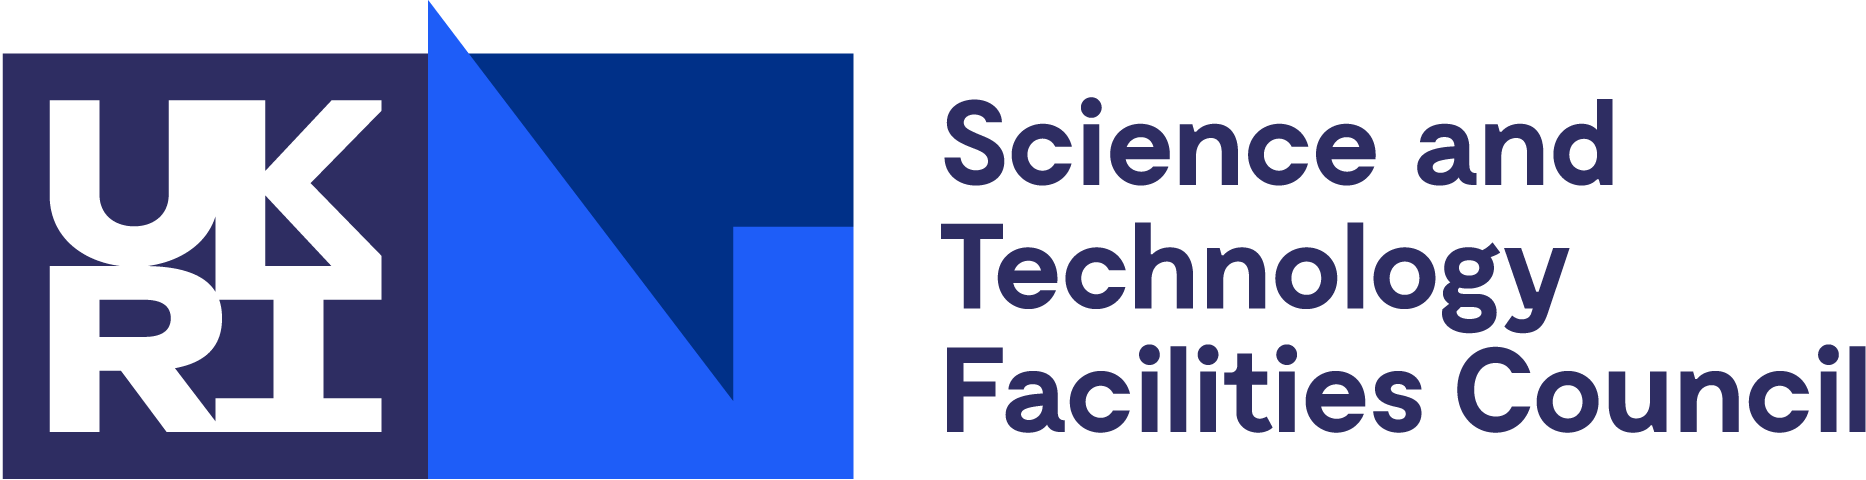 Science and Technology Facilities Council (STFC) – UKRI logo